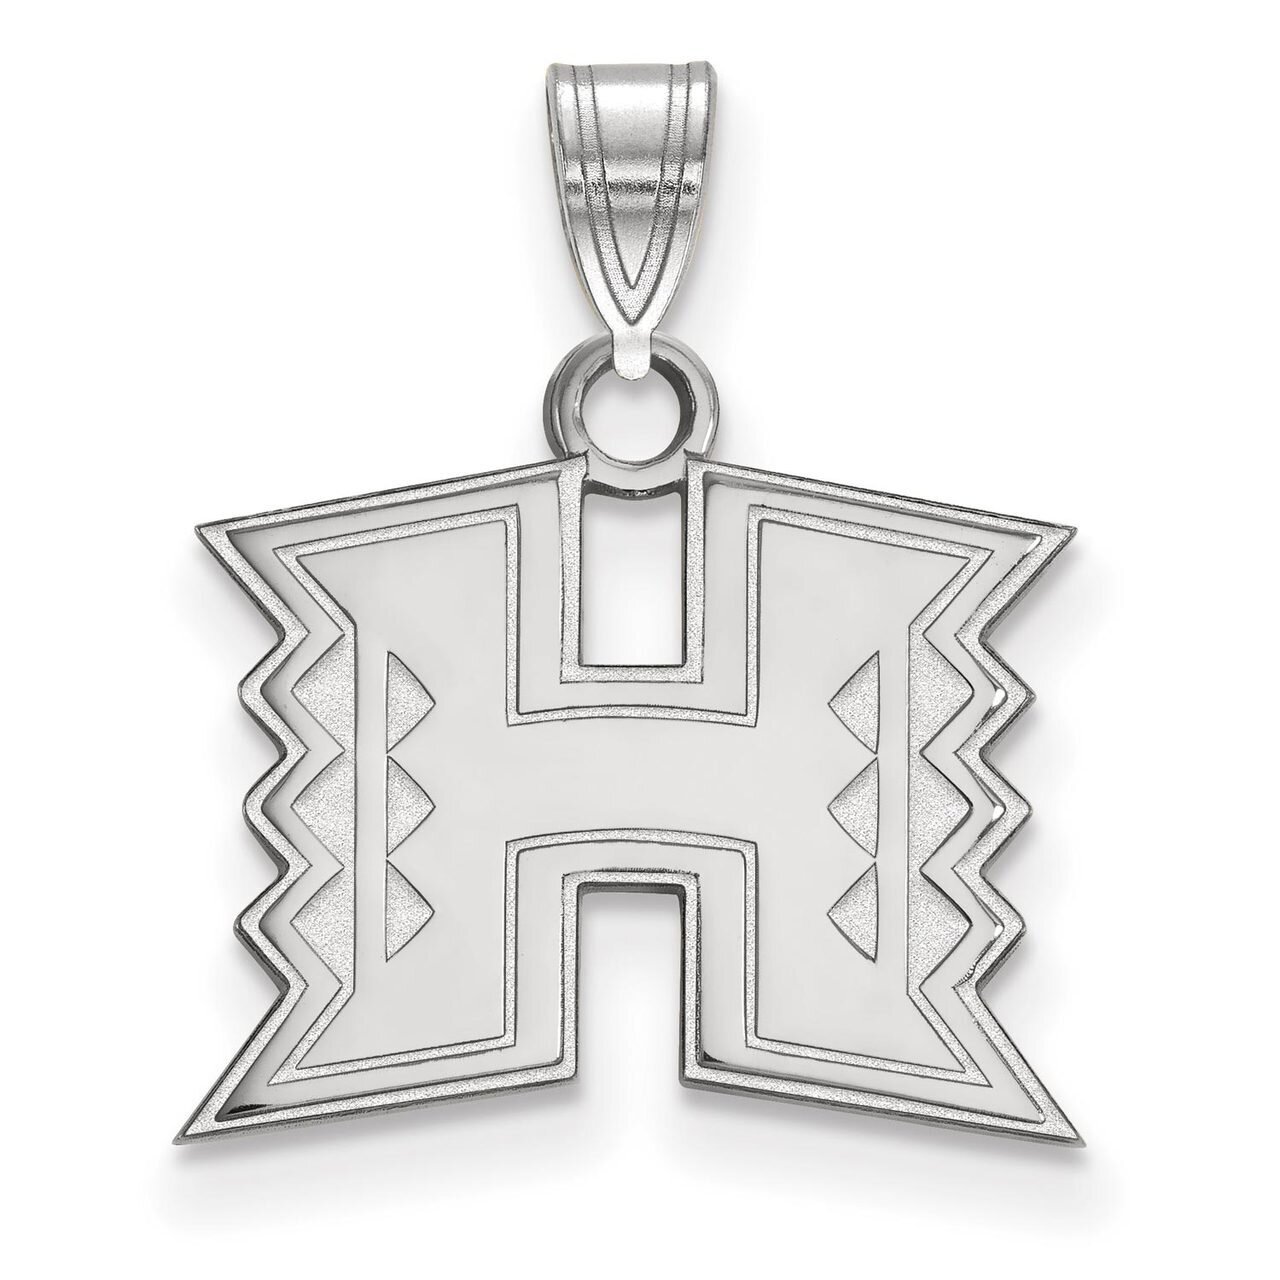 The University of Hawai'i Small Pendant Sterling Silver SS002UHI